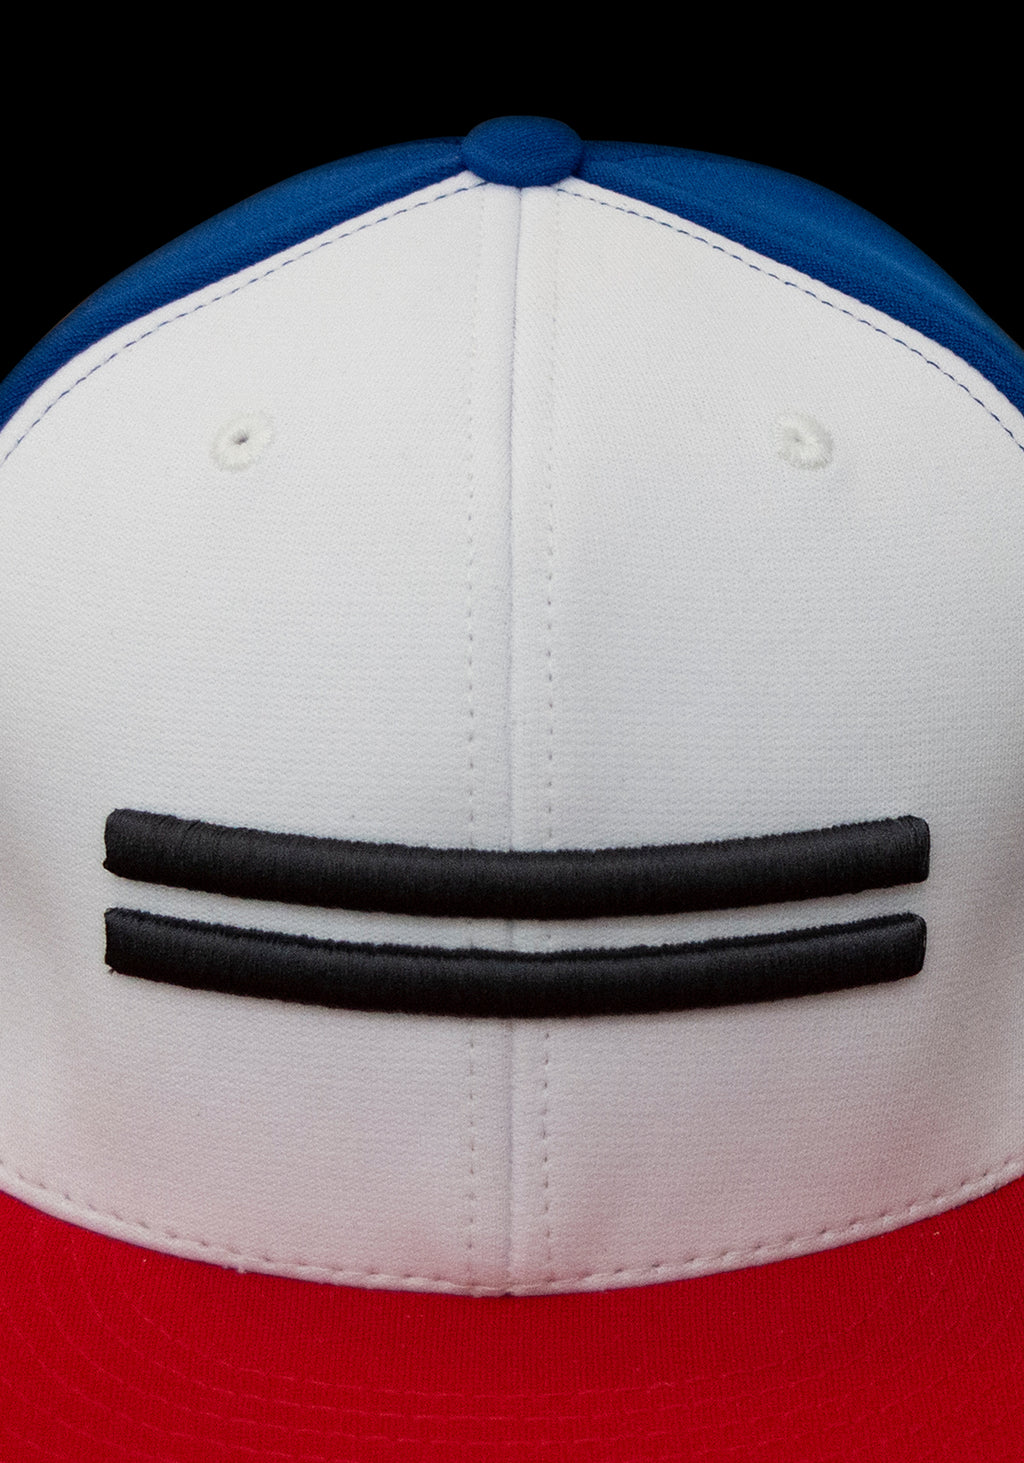 Texas ARod DOUBLE WHAMMY Royal-White Fitted Hat